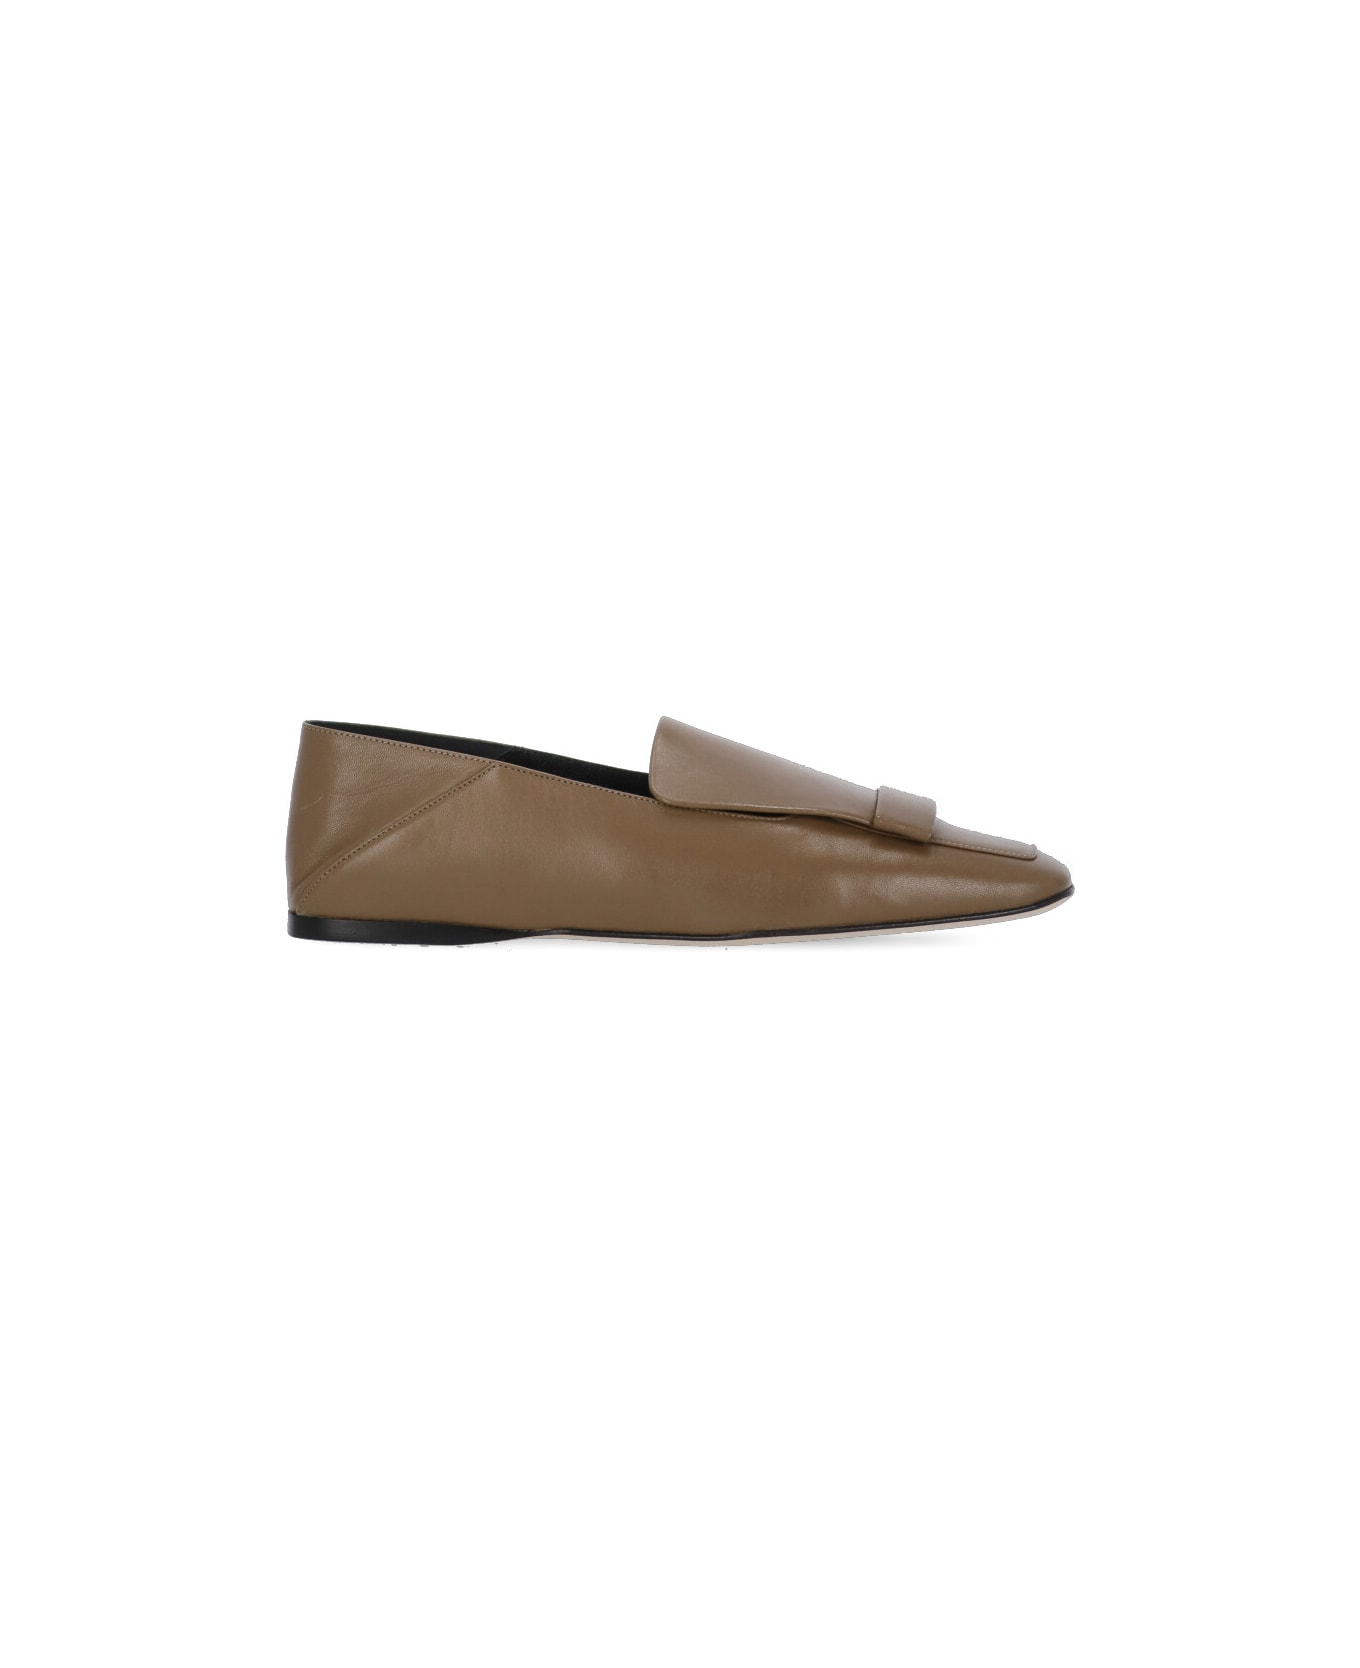 Sergio Rossi Leather Loafers - Brown フラットシューズ